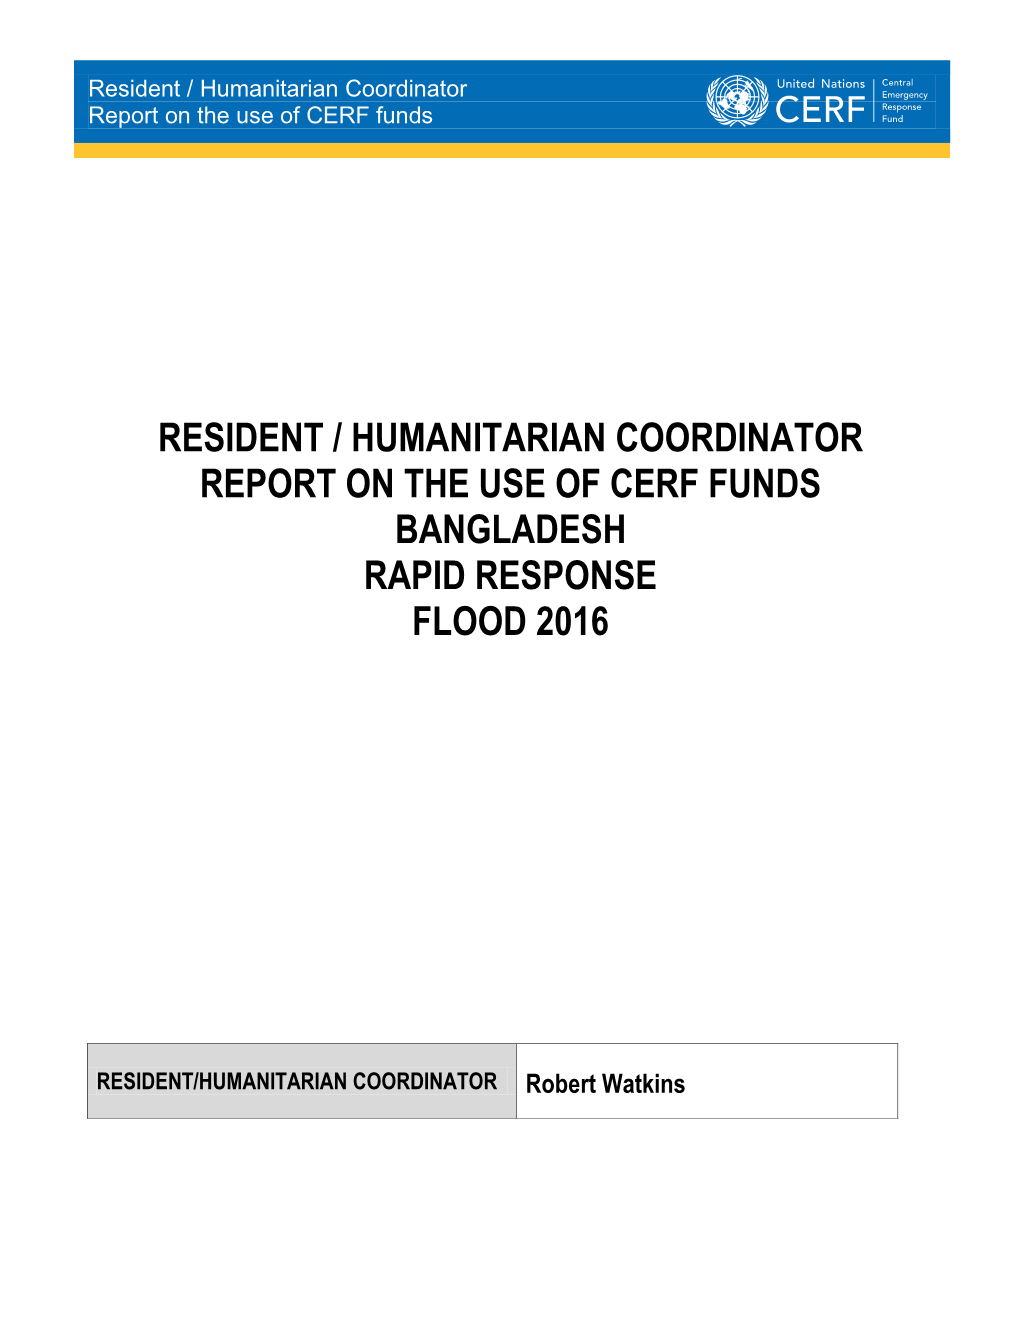 Resident / Humanitarian Coordinator Report on the Use of Cerf Funds Bangladesh Rapid Response Flood 2016